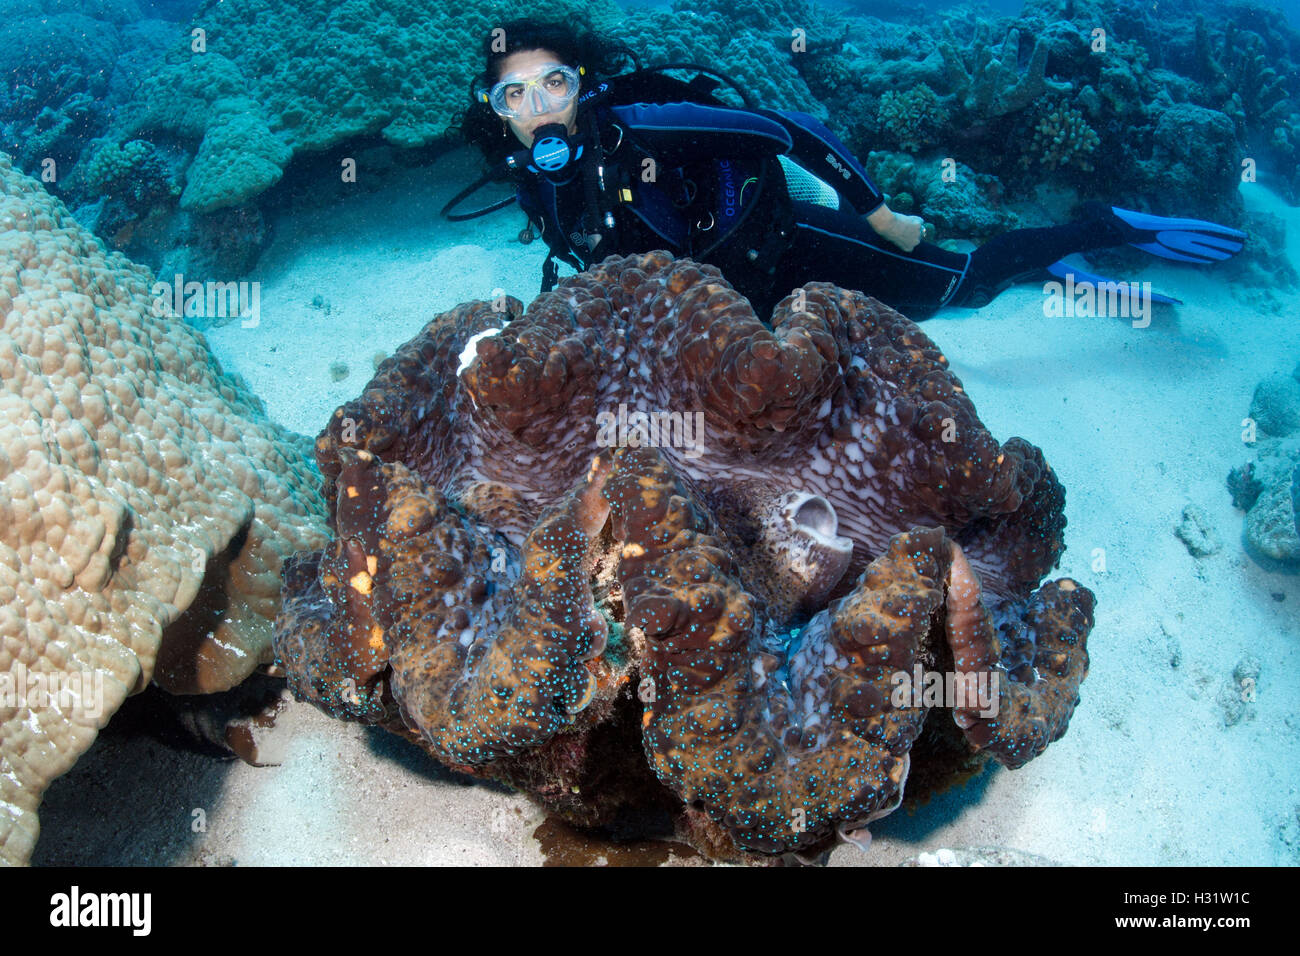 QZ40885-D. Giant Clam (Tridacna gigas), 1 meter wide, with scuba diver (model released) for scale. Great Barrier Reef, Australia Stock Photo